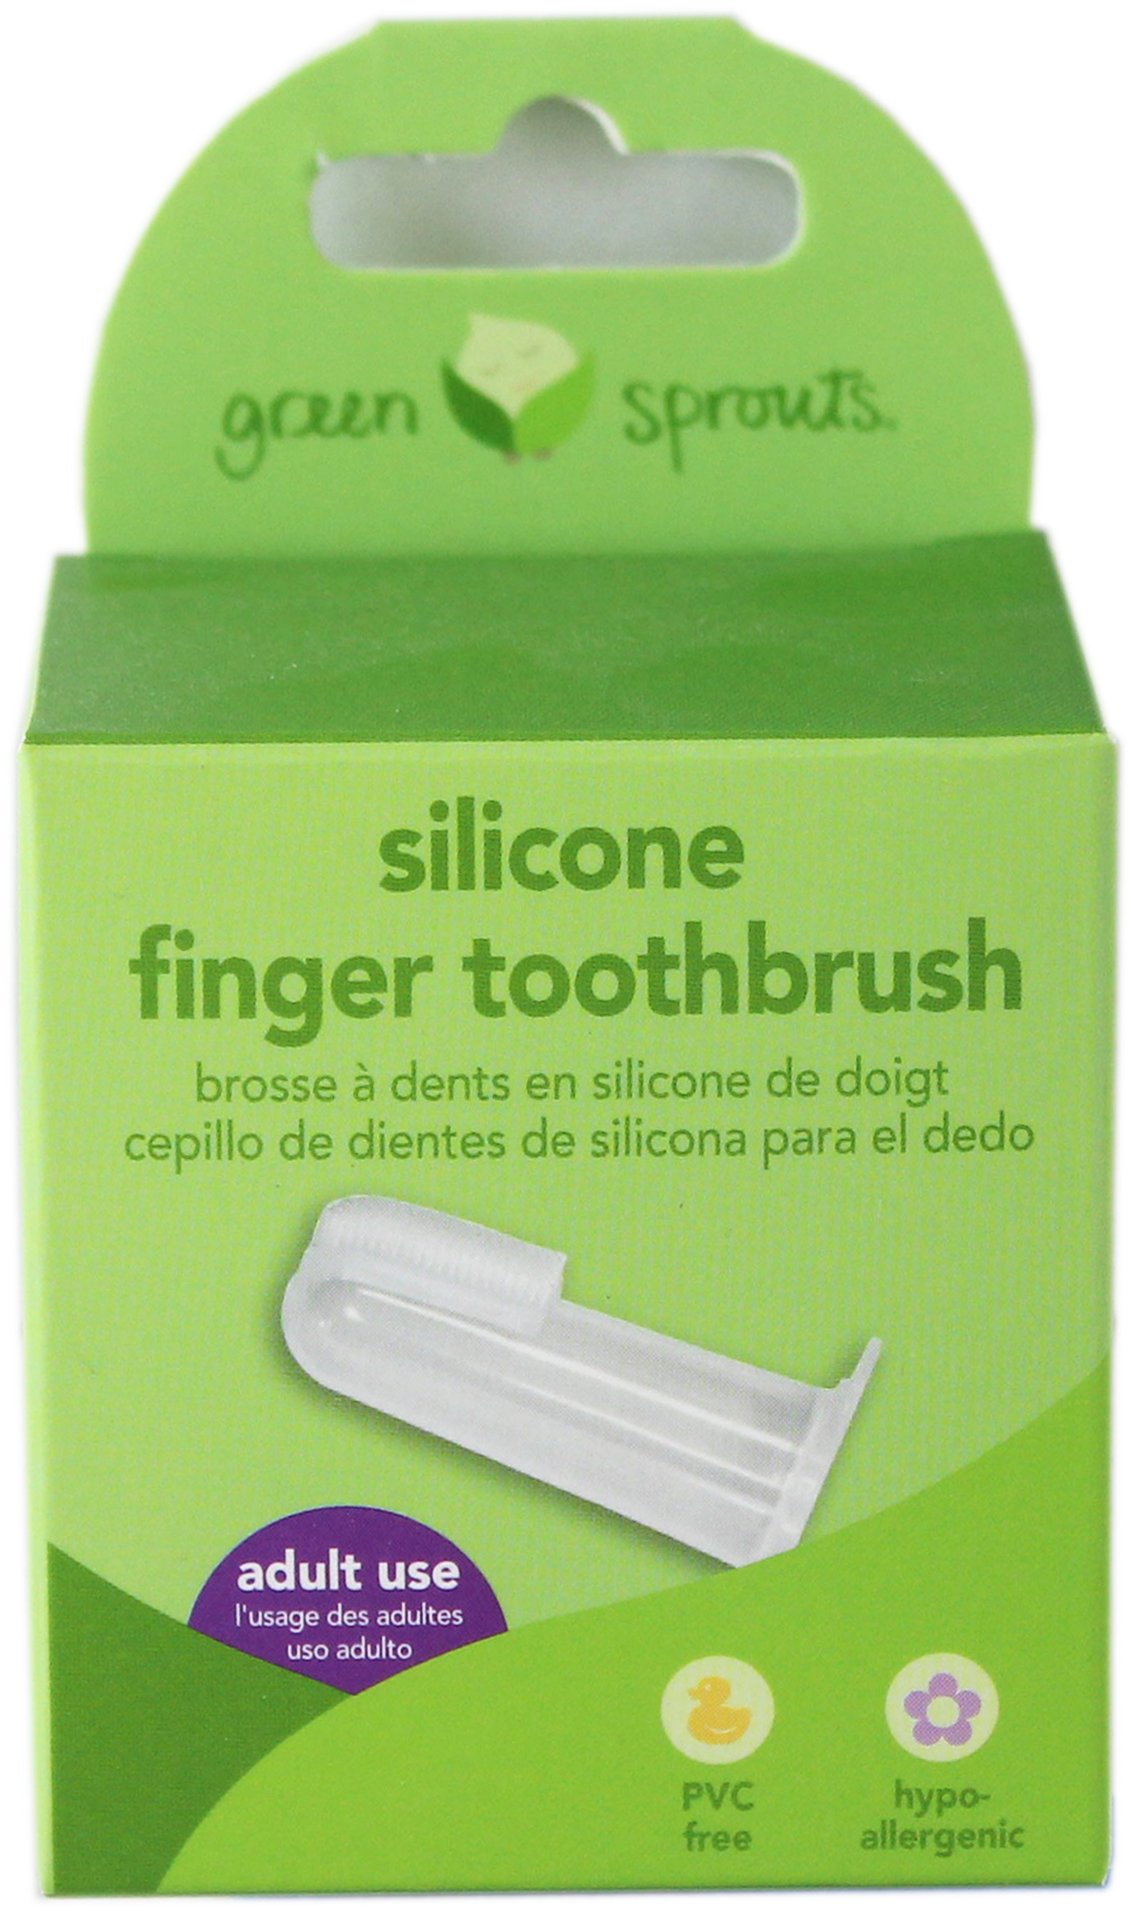 green sprouts toothbrush